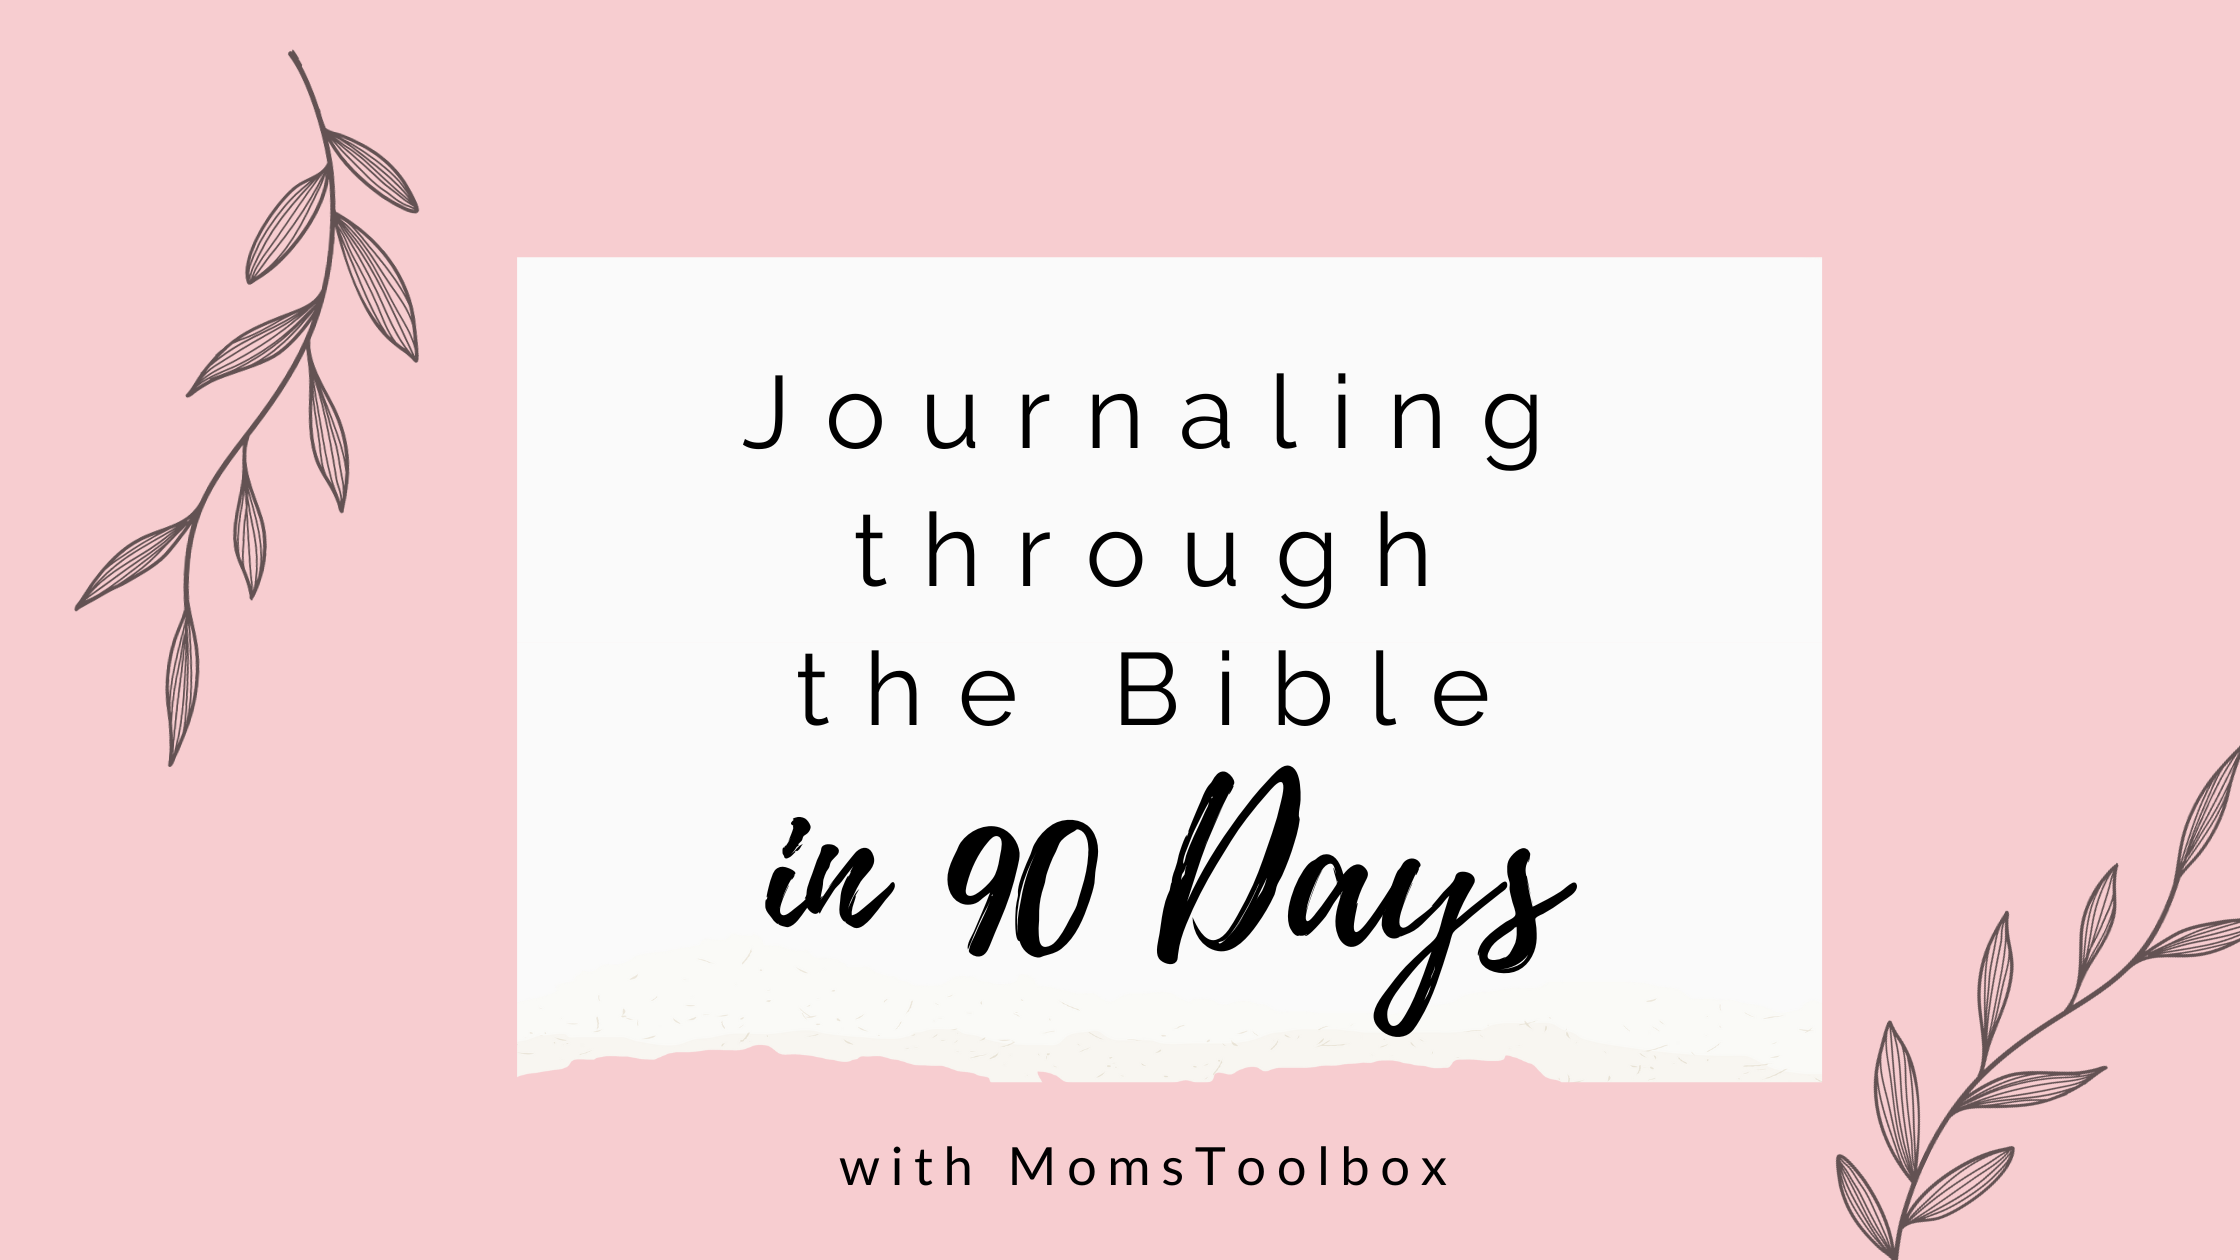 Journaling through the Bible in 90 days: Day 8